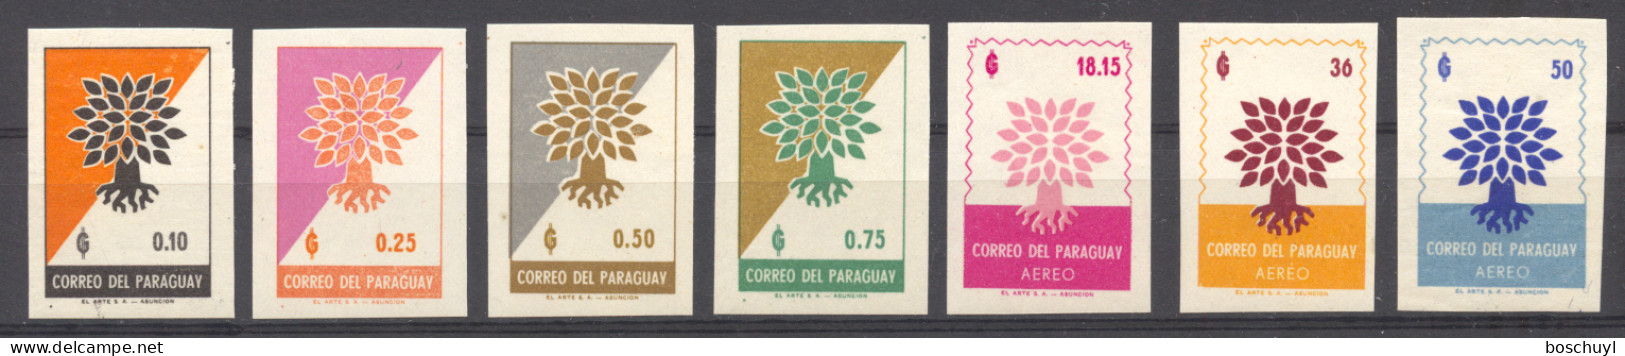 Paraguay, 1961, World Refugee Year, WRY, United Nations, Imperforated, MNH, Michel 965-971 - Réfugiés